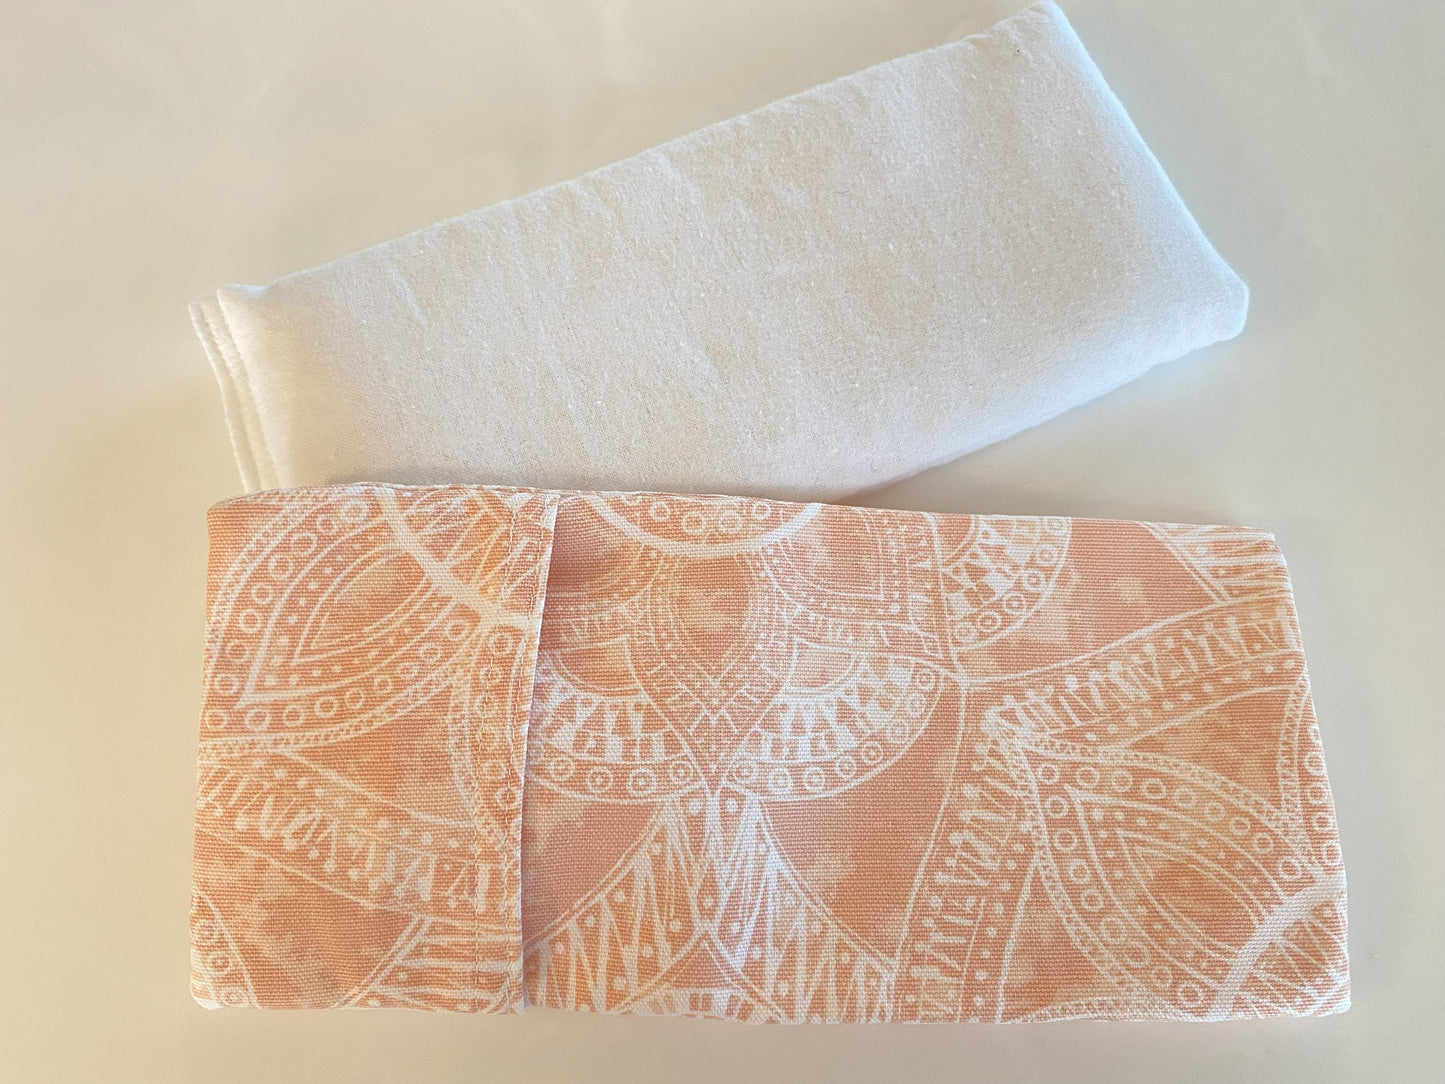 Washable Microwavable Rice Bag l Eye Pillow l Comfort Therapy Pack l Aromatherapy Bag l Misc. Prints